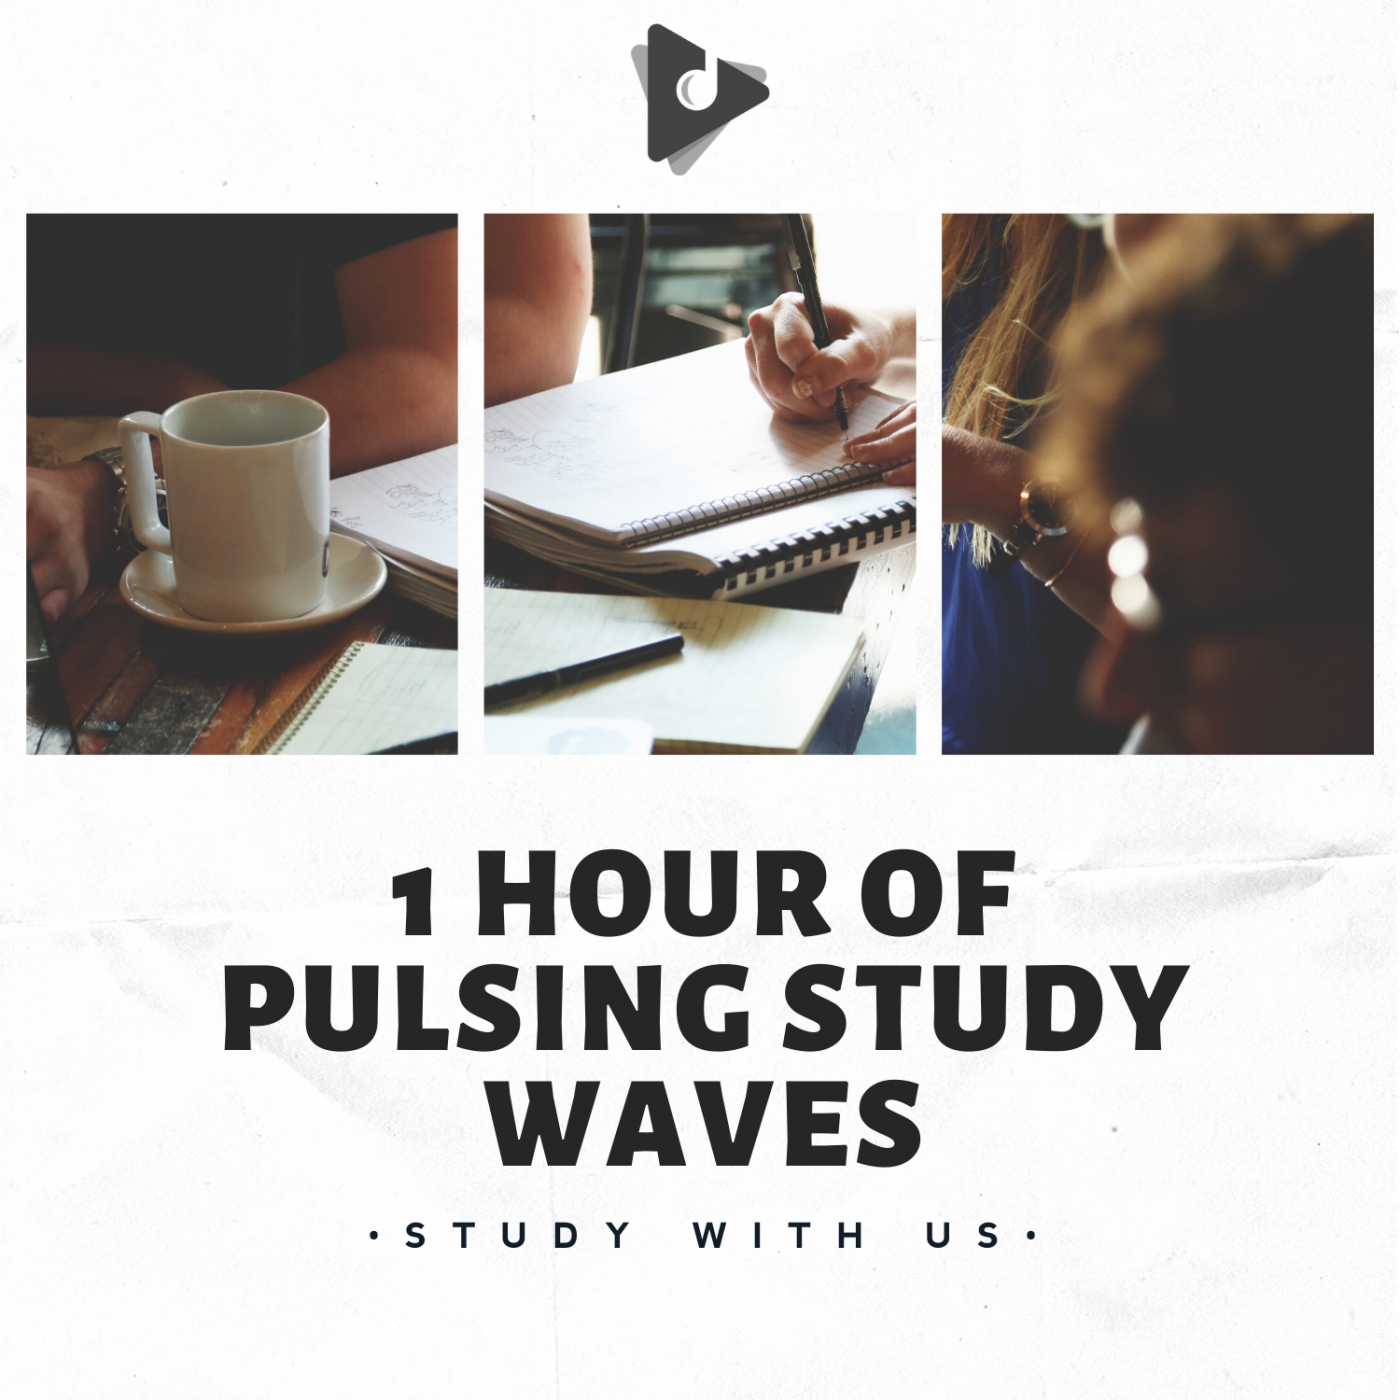 1 Hour of Pulsing Study Waves